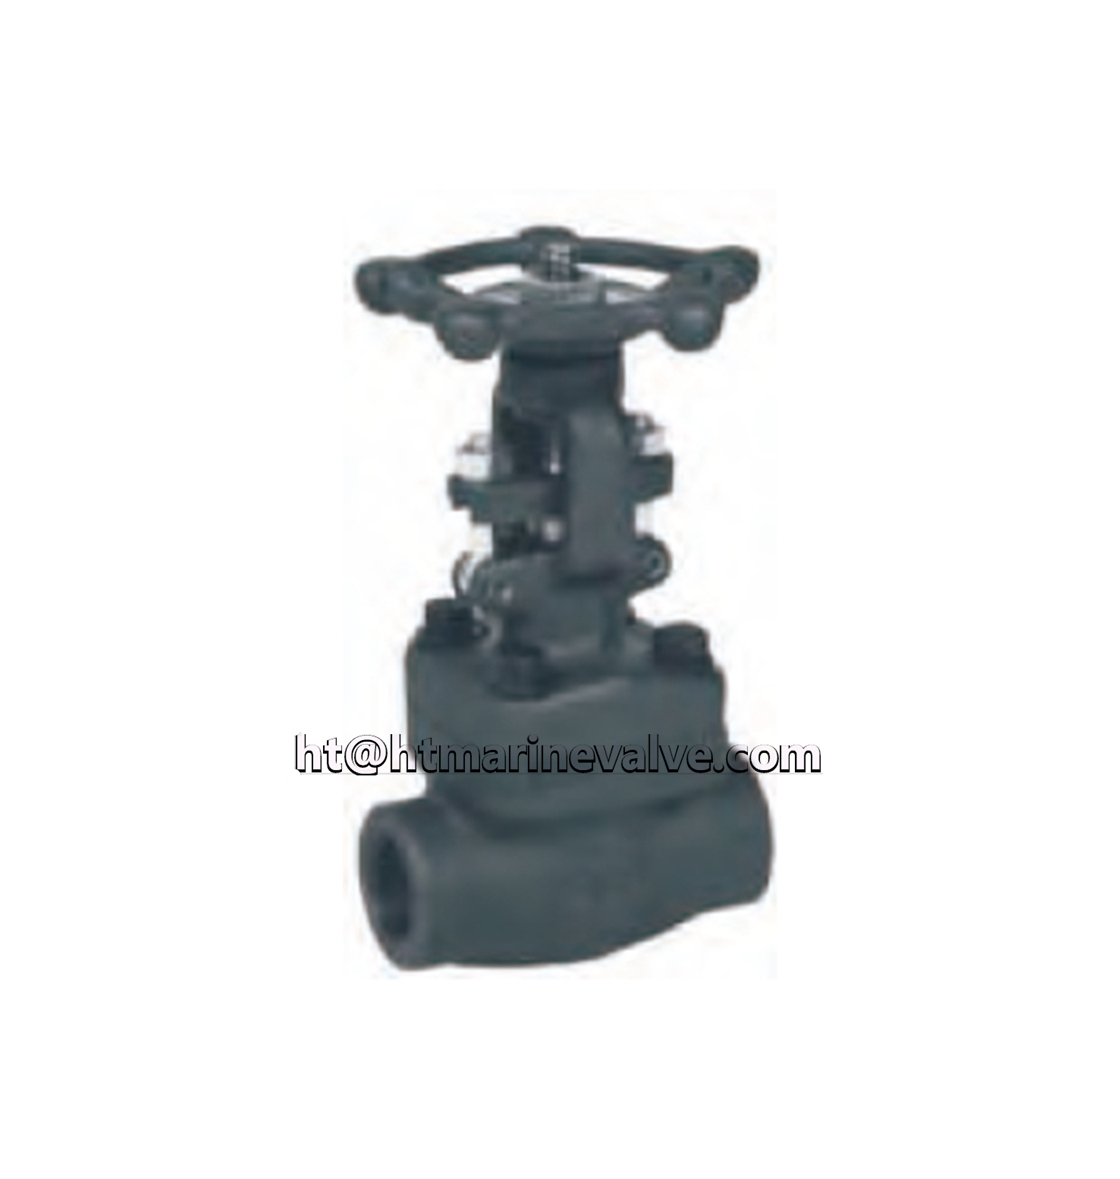 FORGED STEEL GATE VALVE CL800